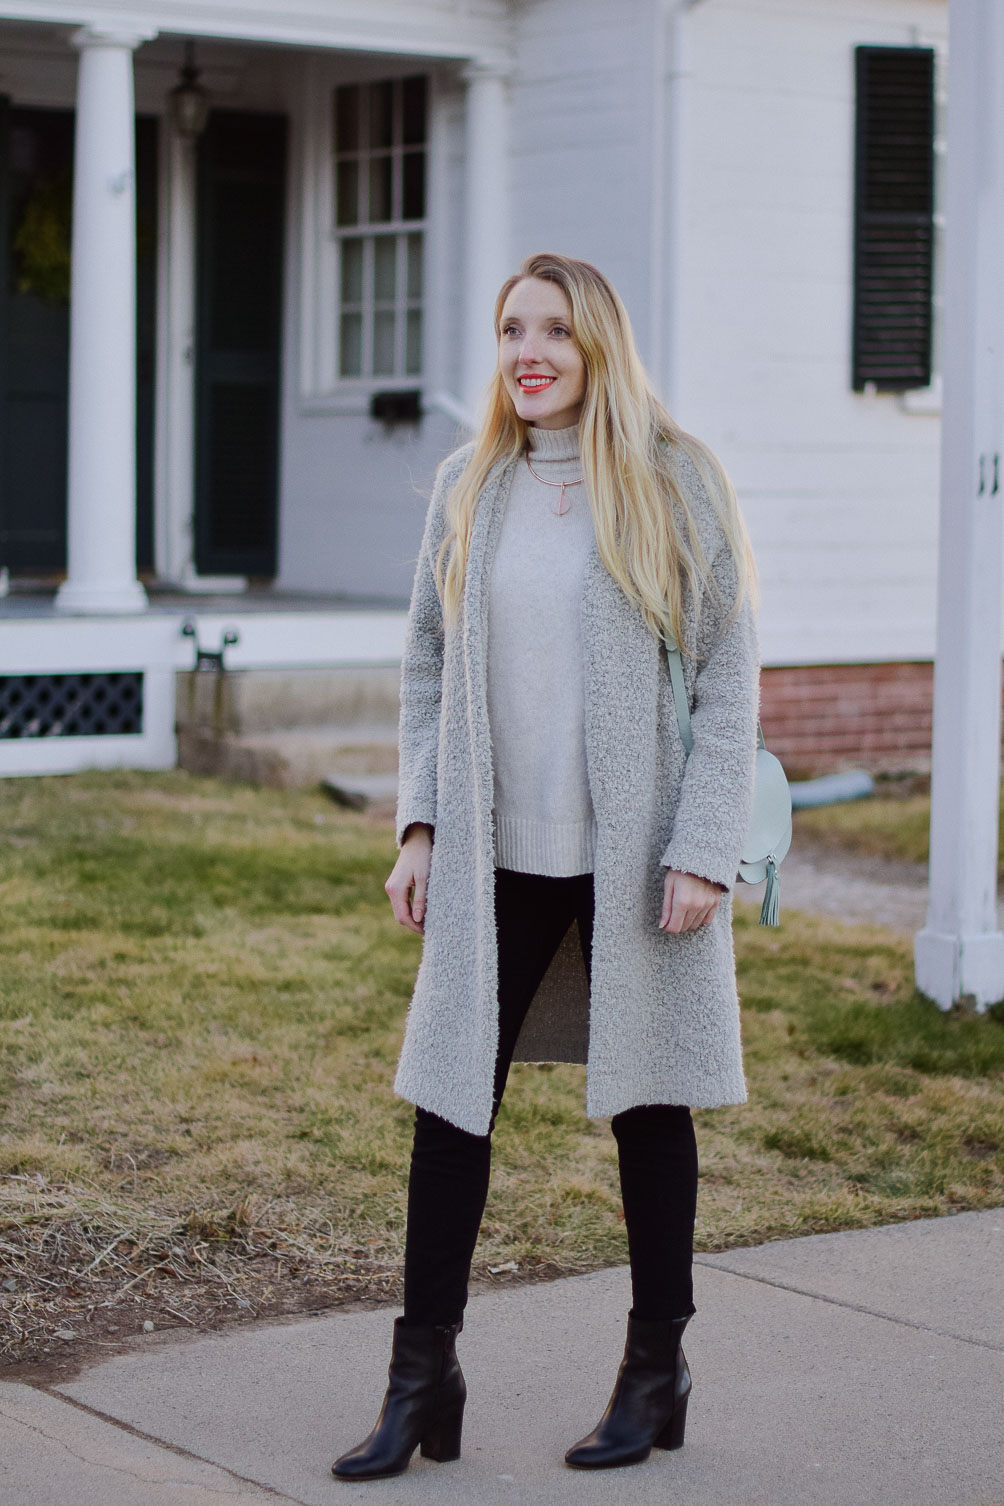 styling a coatigan layered over black skinny jeans and turtleneck sweater with black leather booties